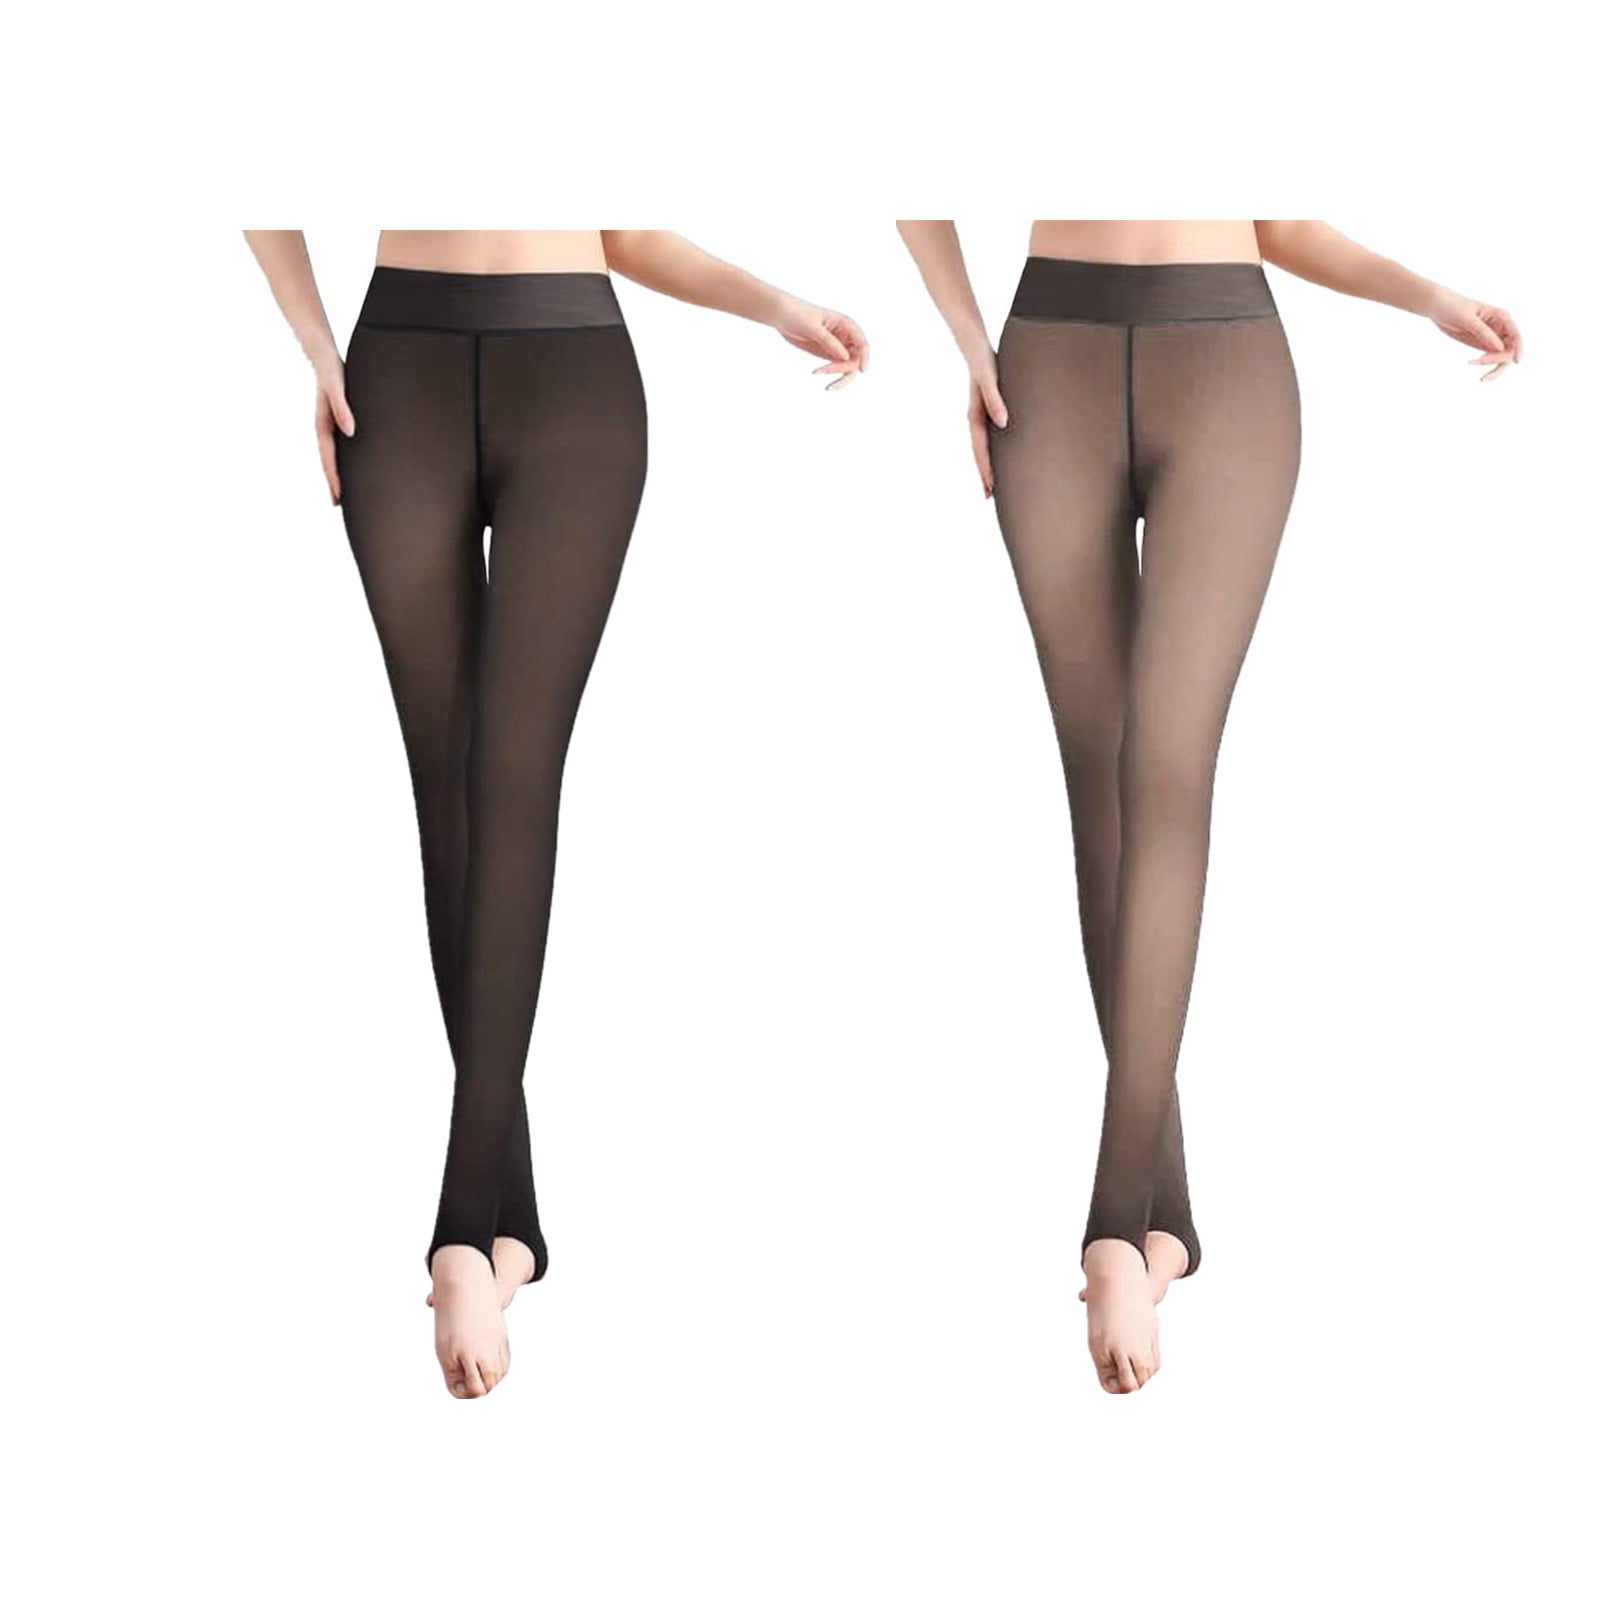 Women Fleece Lined Tights Fake Translucent Pantyhose High Waisted Warm  Winter Sheer Thick Fleece Tights Zh52